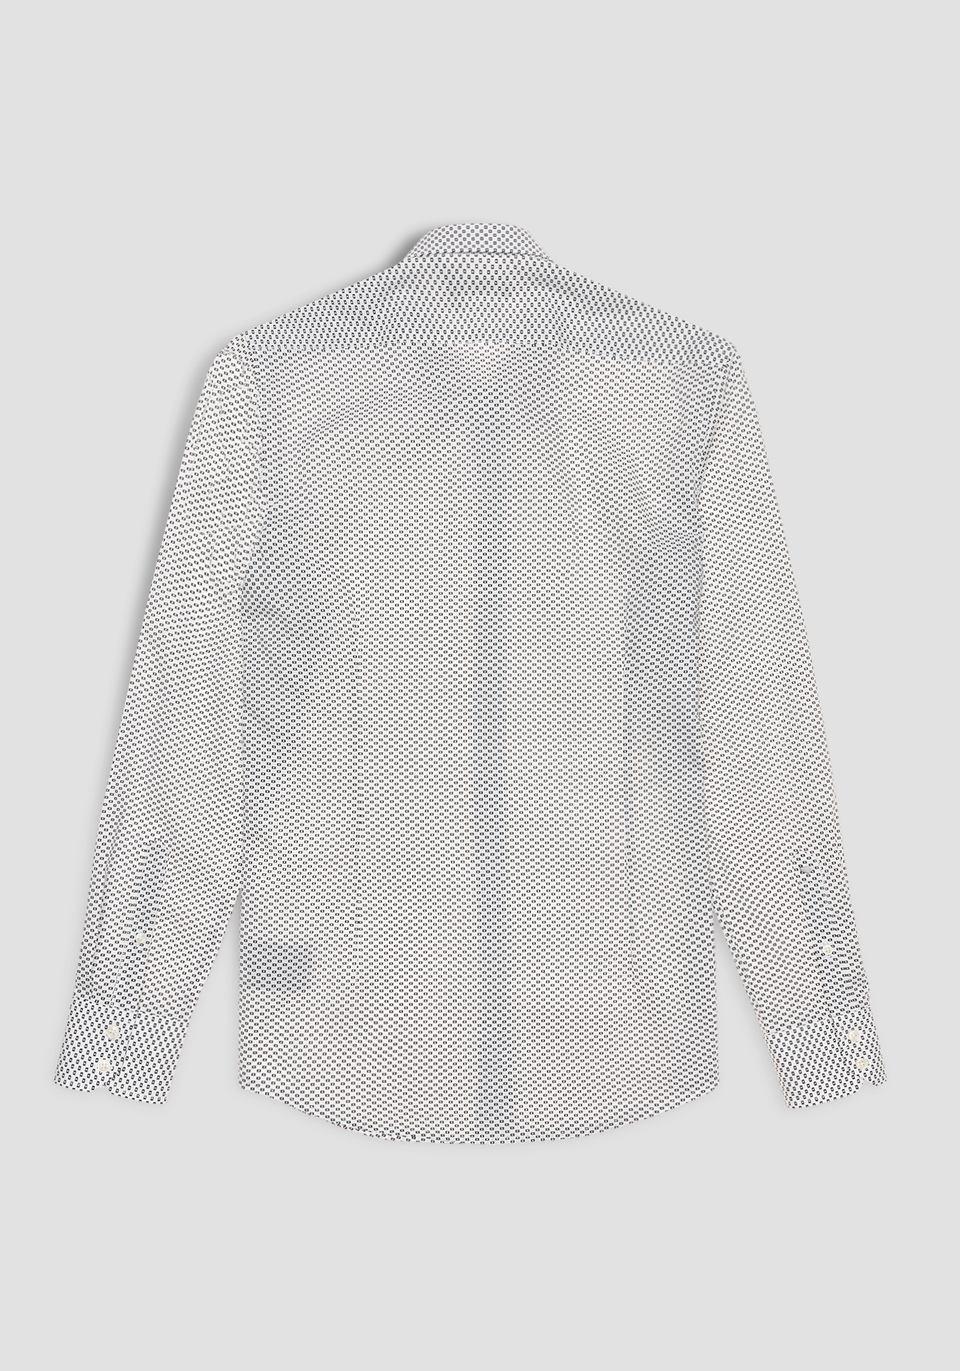 SLIM-FIT SHIRT IN 100% SOFT COTTON WITH A GEOMETRIC MICRO-PATTERN PRINT - Antony Morato Online Shop